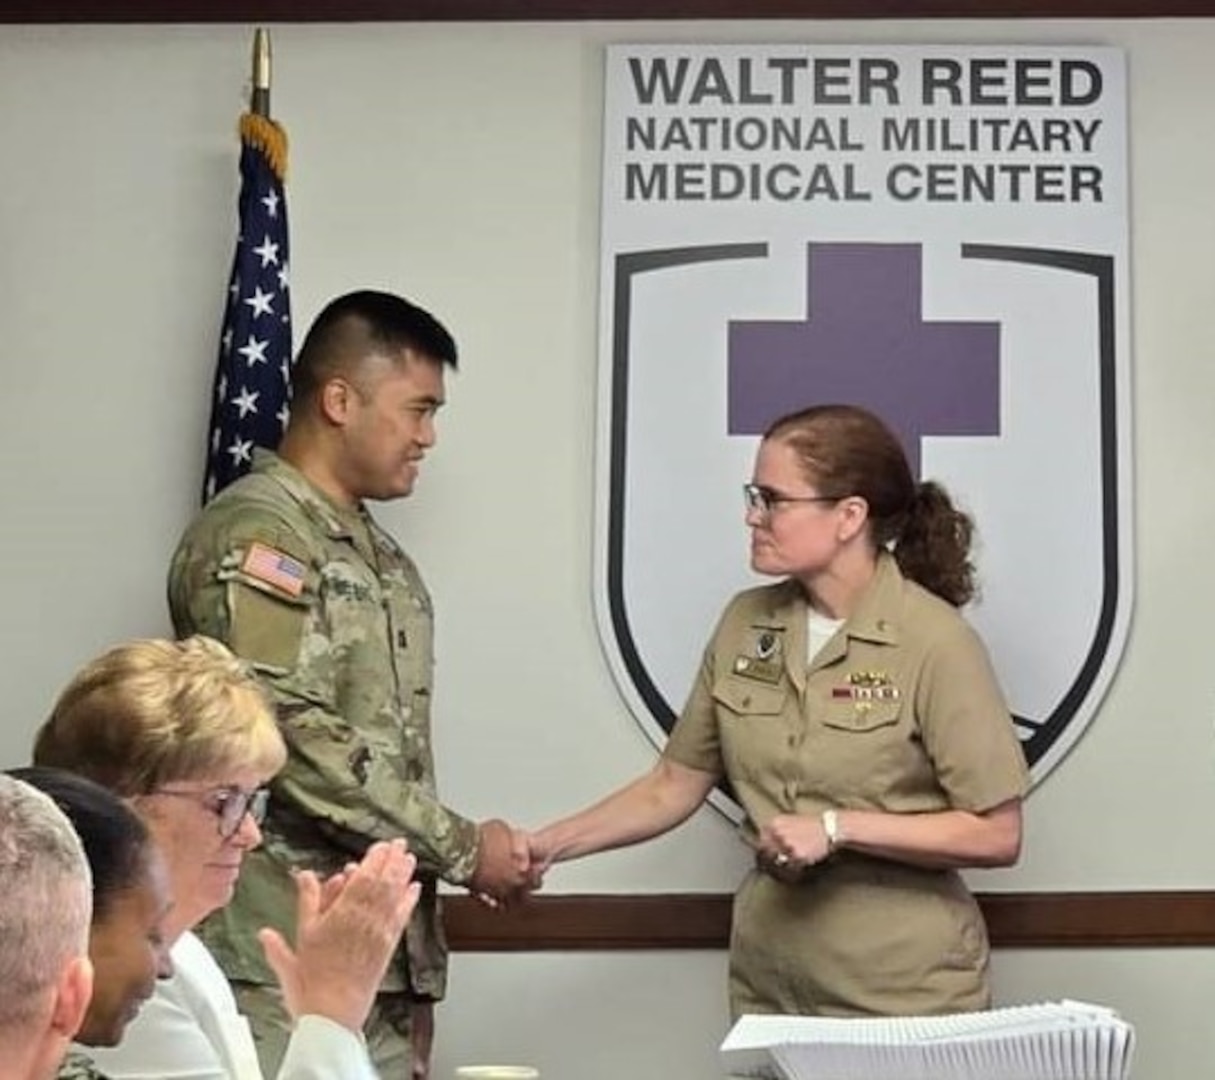 Army Capt. Mark DeJesus (left), an Emergency Department registered nurse, is recognized and congratulated by Walter Reed Director U.S. Navy Capt. (Dr.) Melissa Austin (right) and the rest of the Walter Reed Board of Directors during a BoD meeting on July 16. DeJesus is credited with providing life-saving care to an infant left in a vehicle parked off base on June 30 when temperatures were in the 90s.